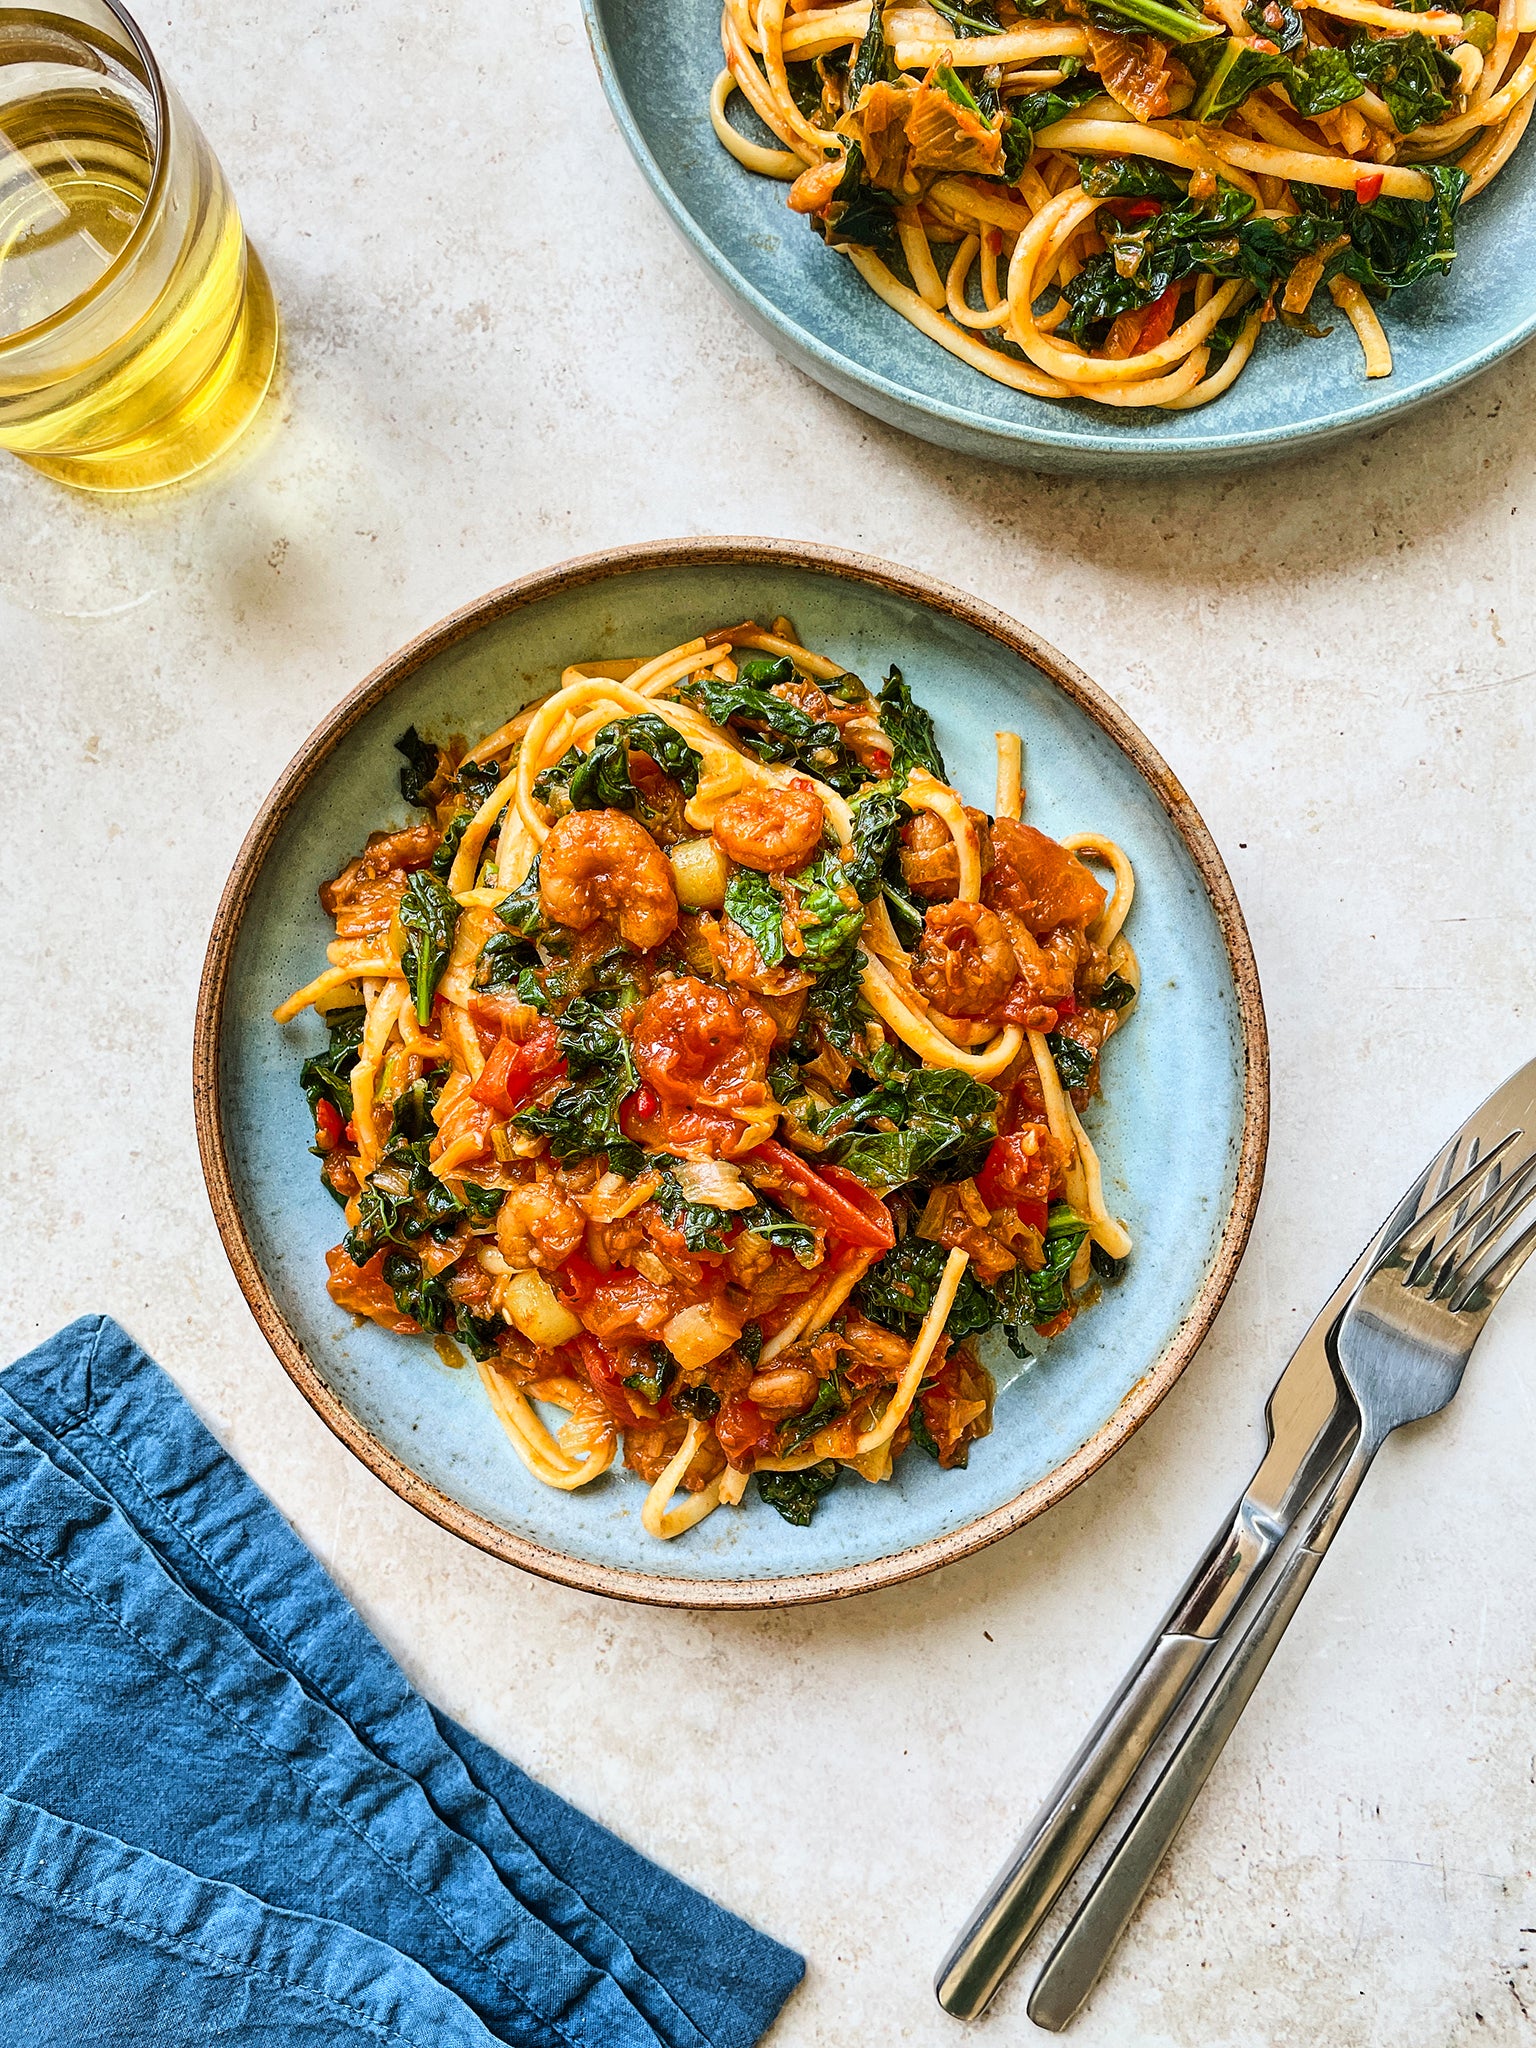 For pasta lovers, linguine with kale, shrimp and chili is a tasty dinner that's ready in just 20 minutes.